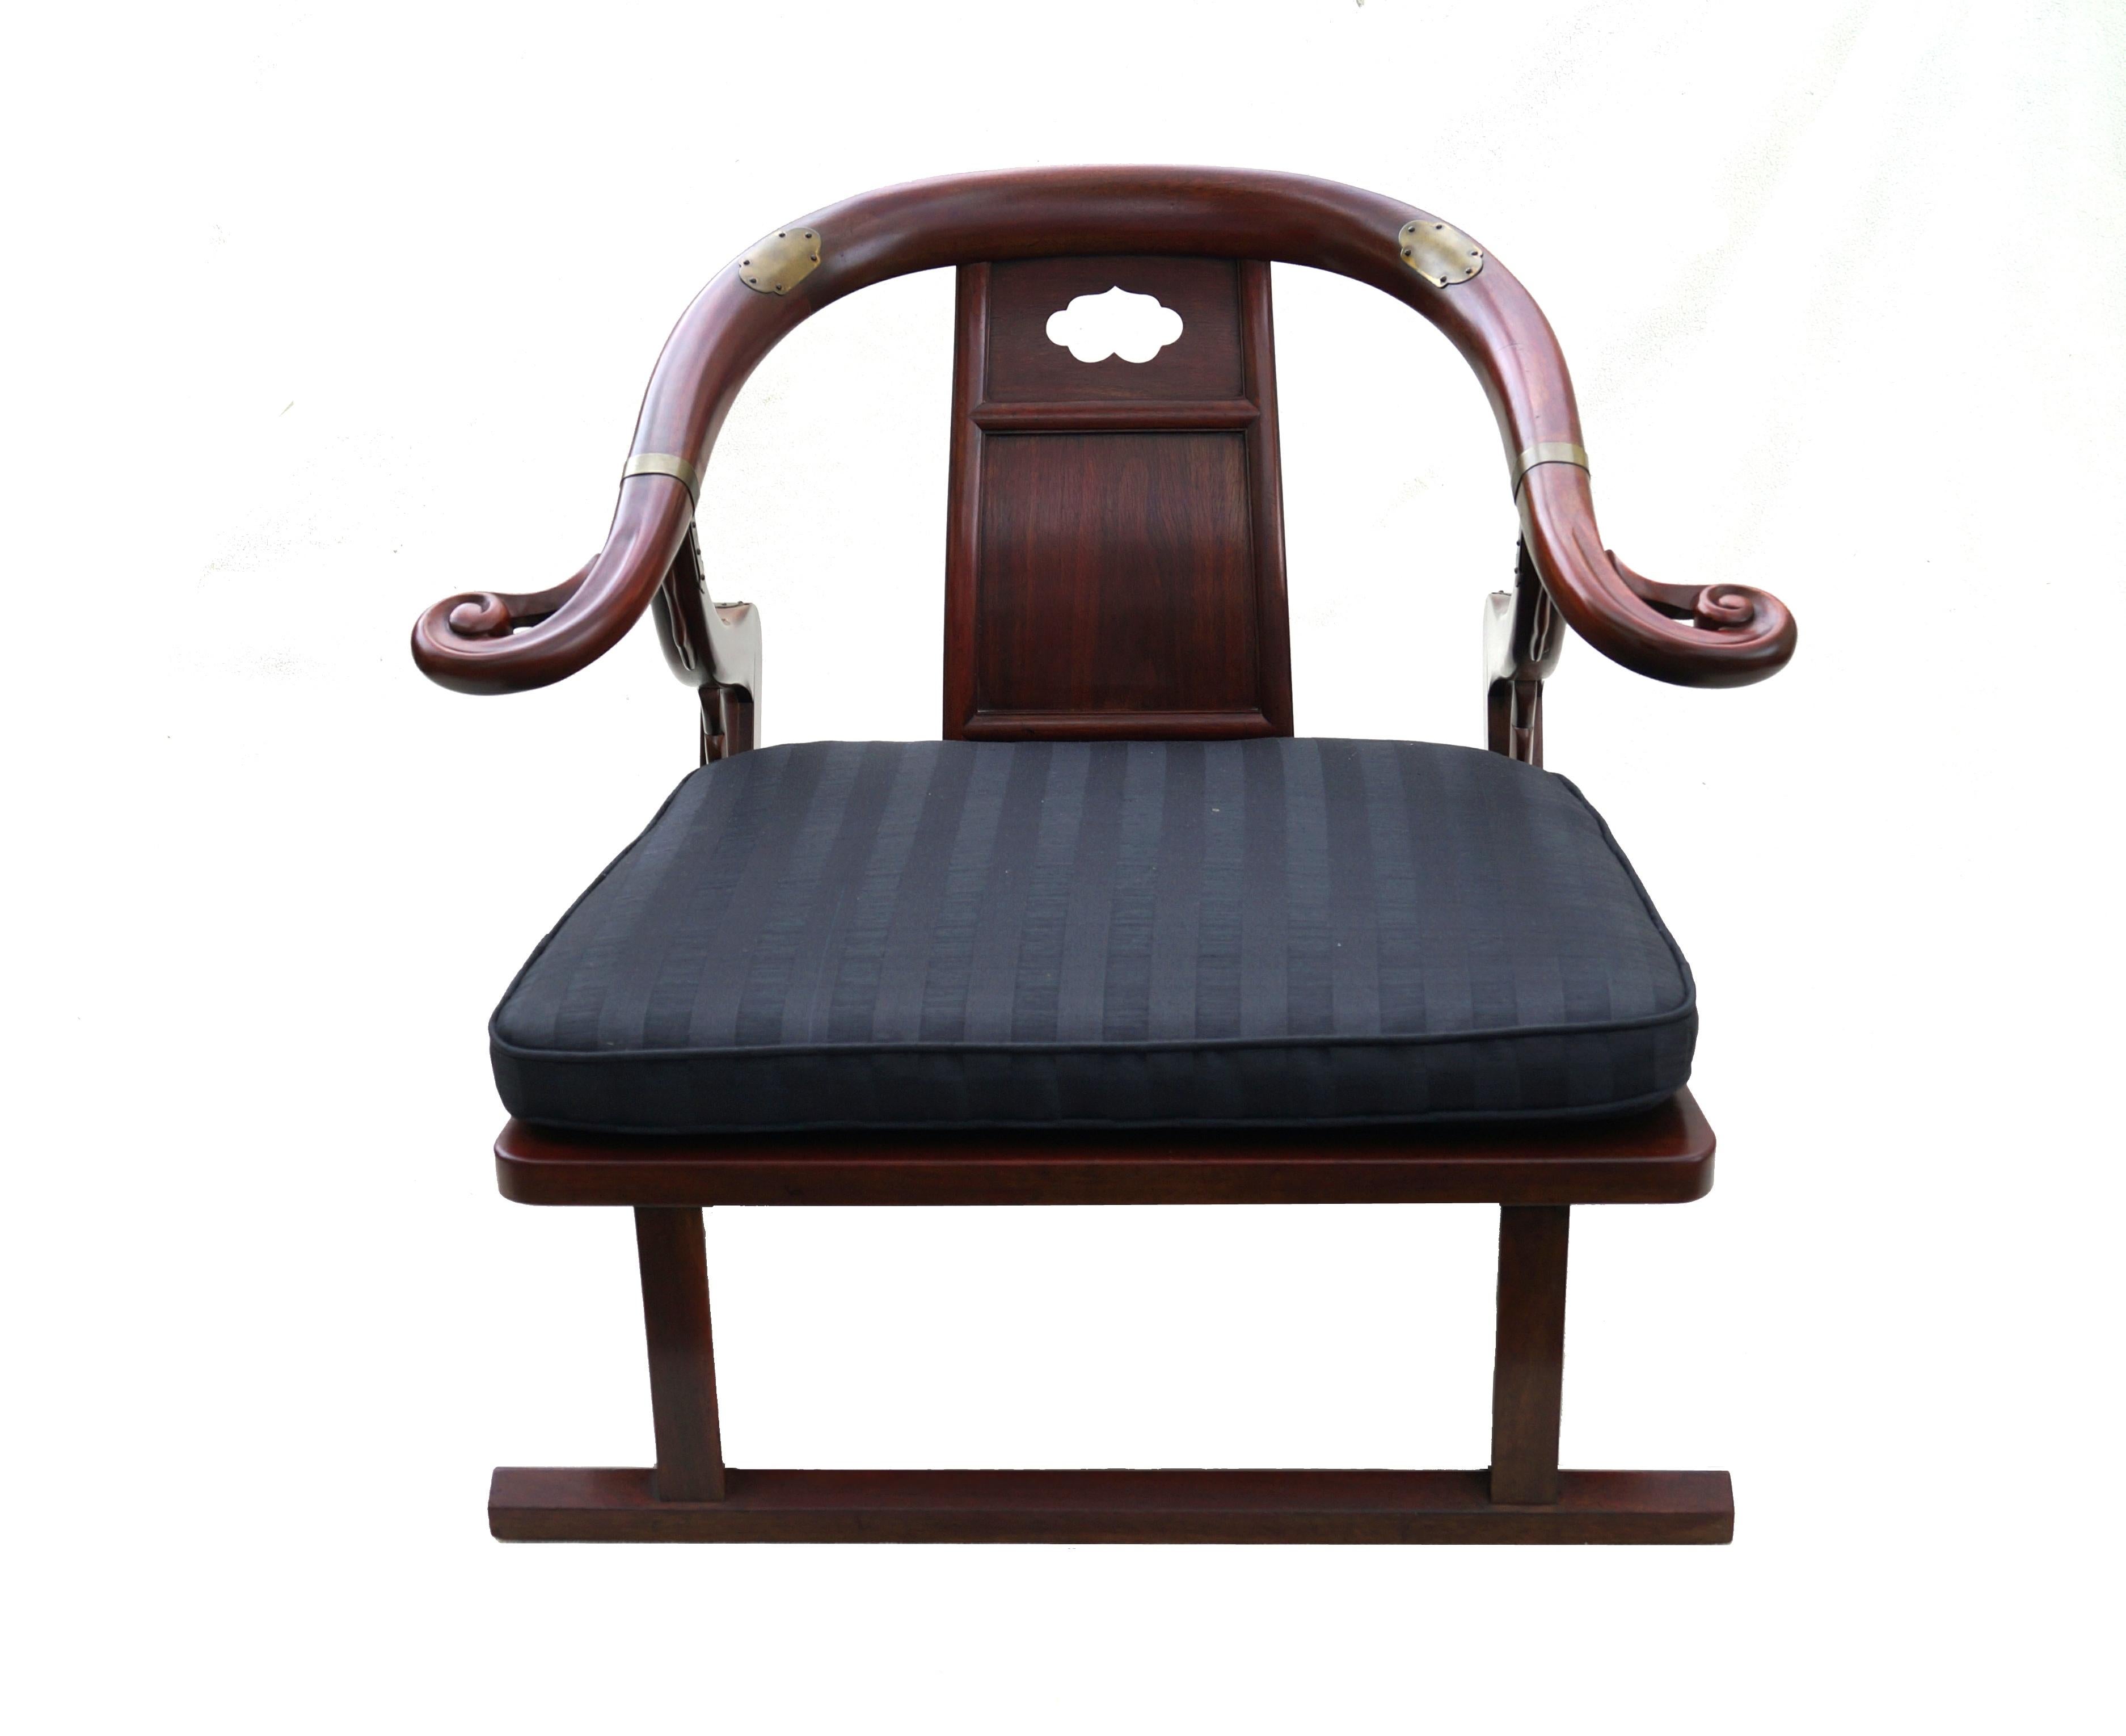 A fine Asian inspired, brass accented and lounge chair from the 